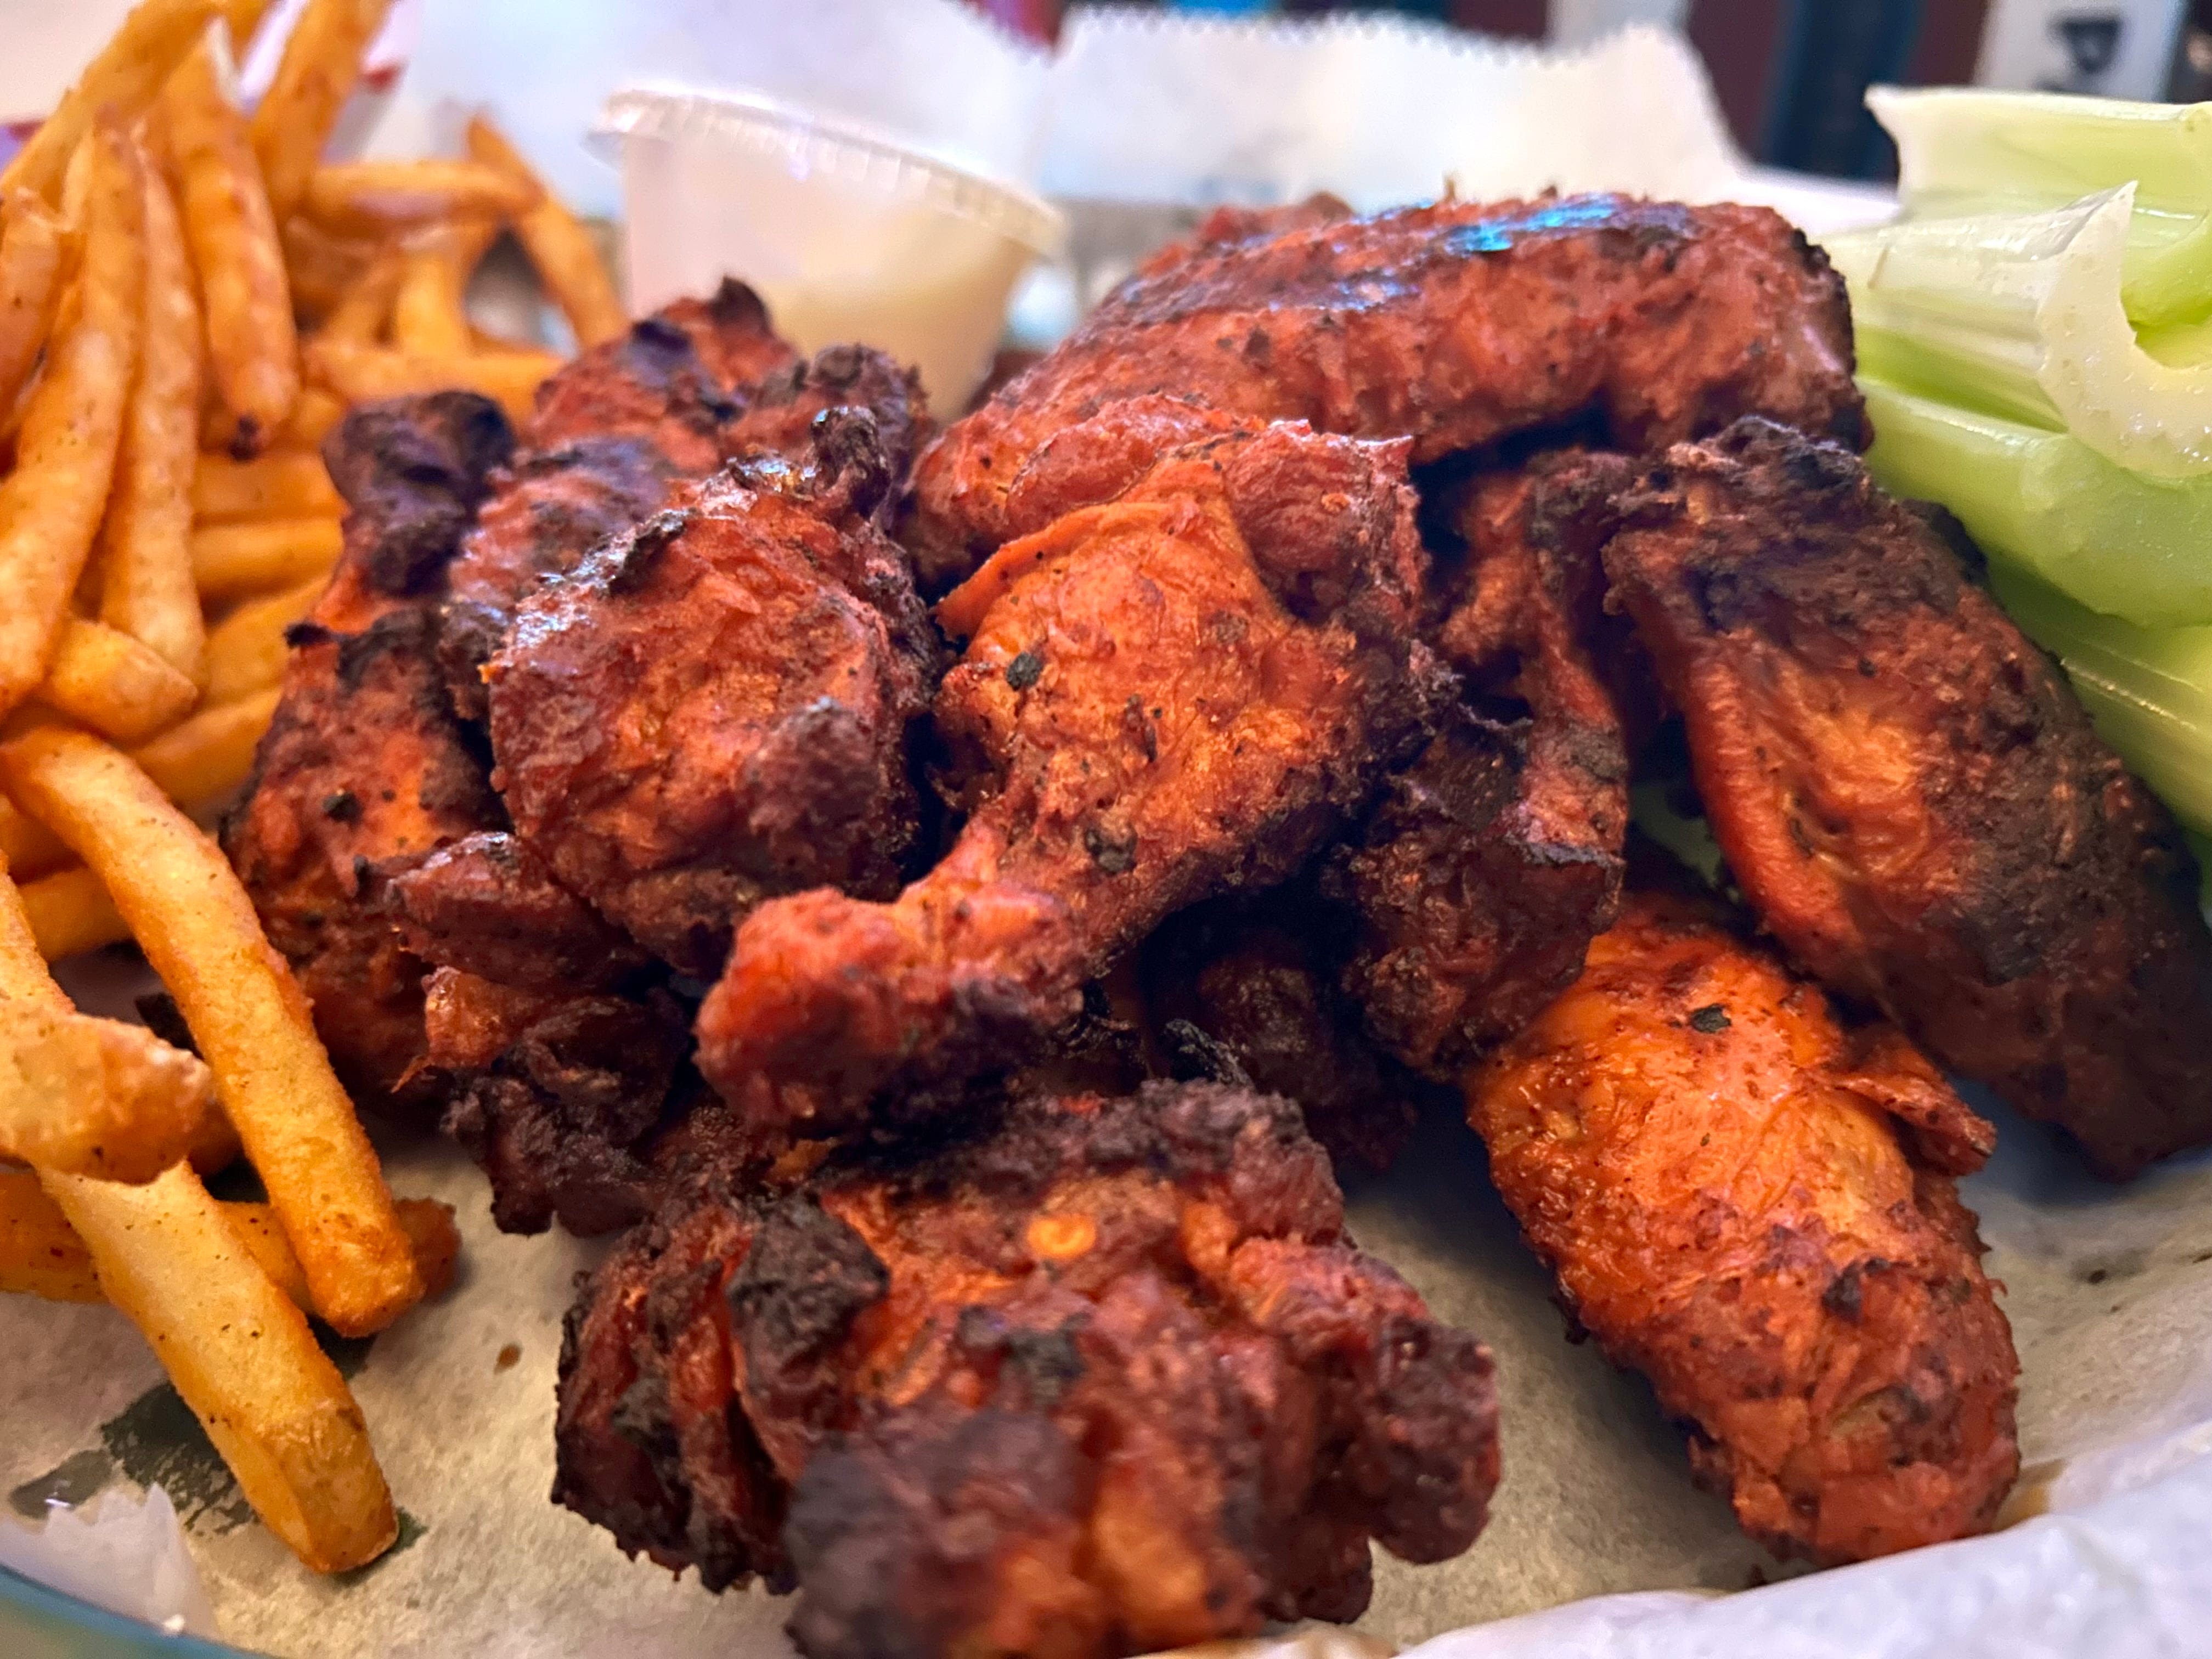 Top 5 things to do in Palm Beach County, including South Florida Wing Bash in Boca